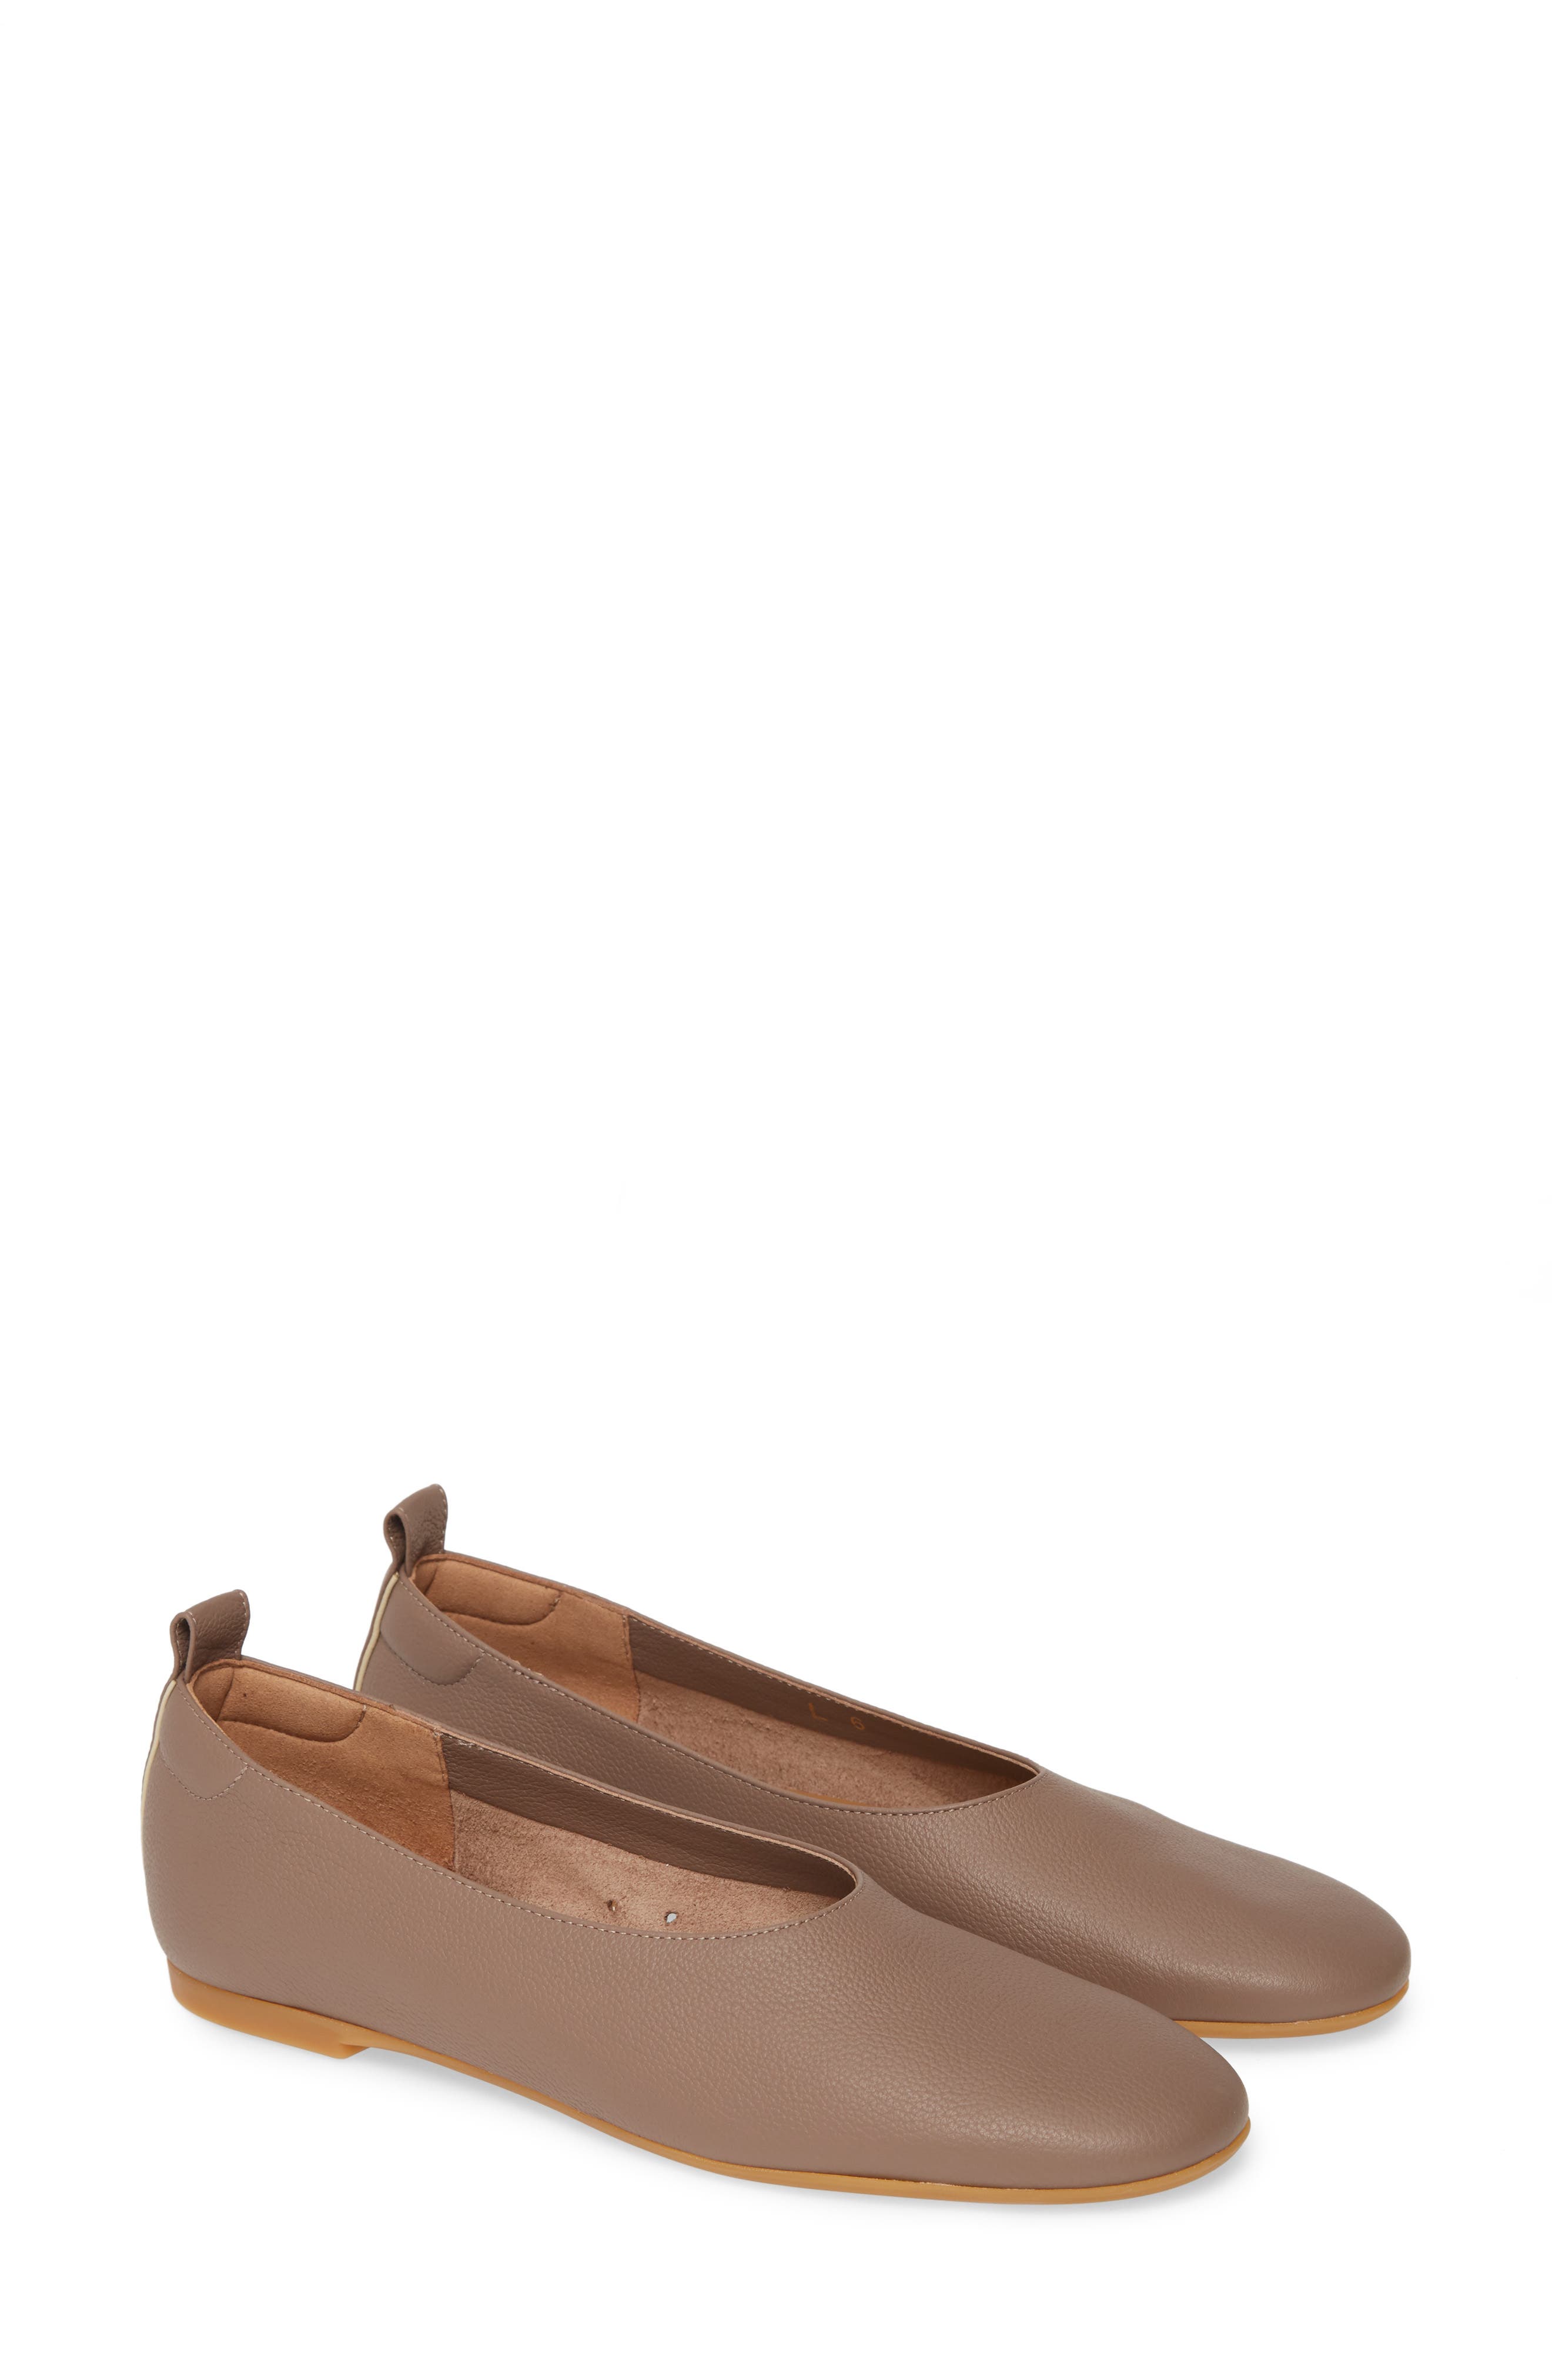 EVERLANE The Day Glove Leather Ballet Flat Nordstrom Rack